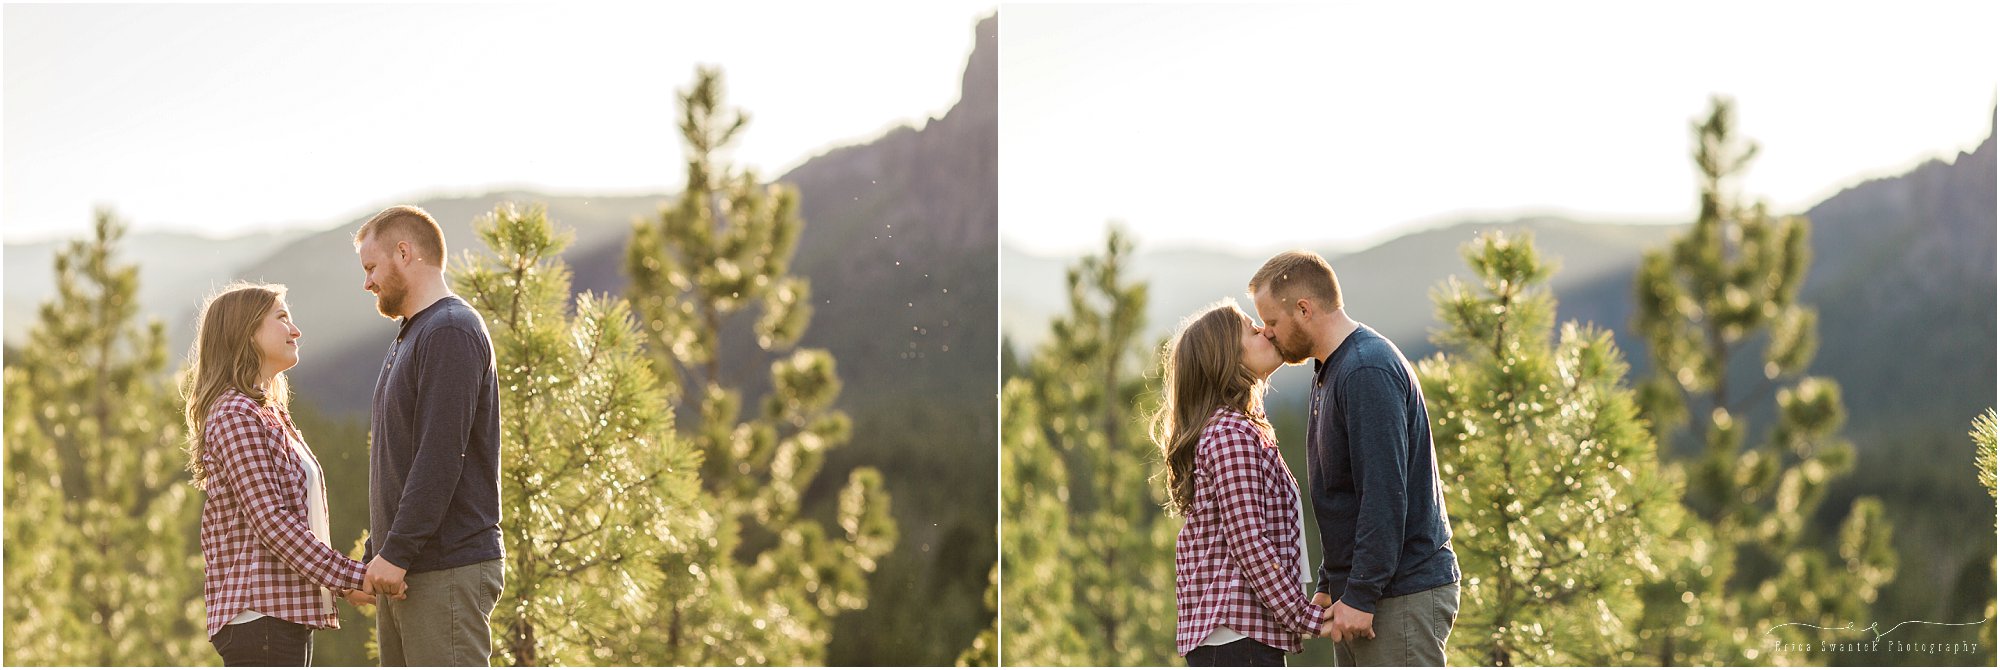 A beautiful engagement session in the Tumalo Creek area of Bend, Oregon. | Erica Swantek Photography